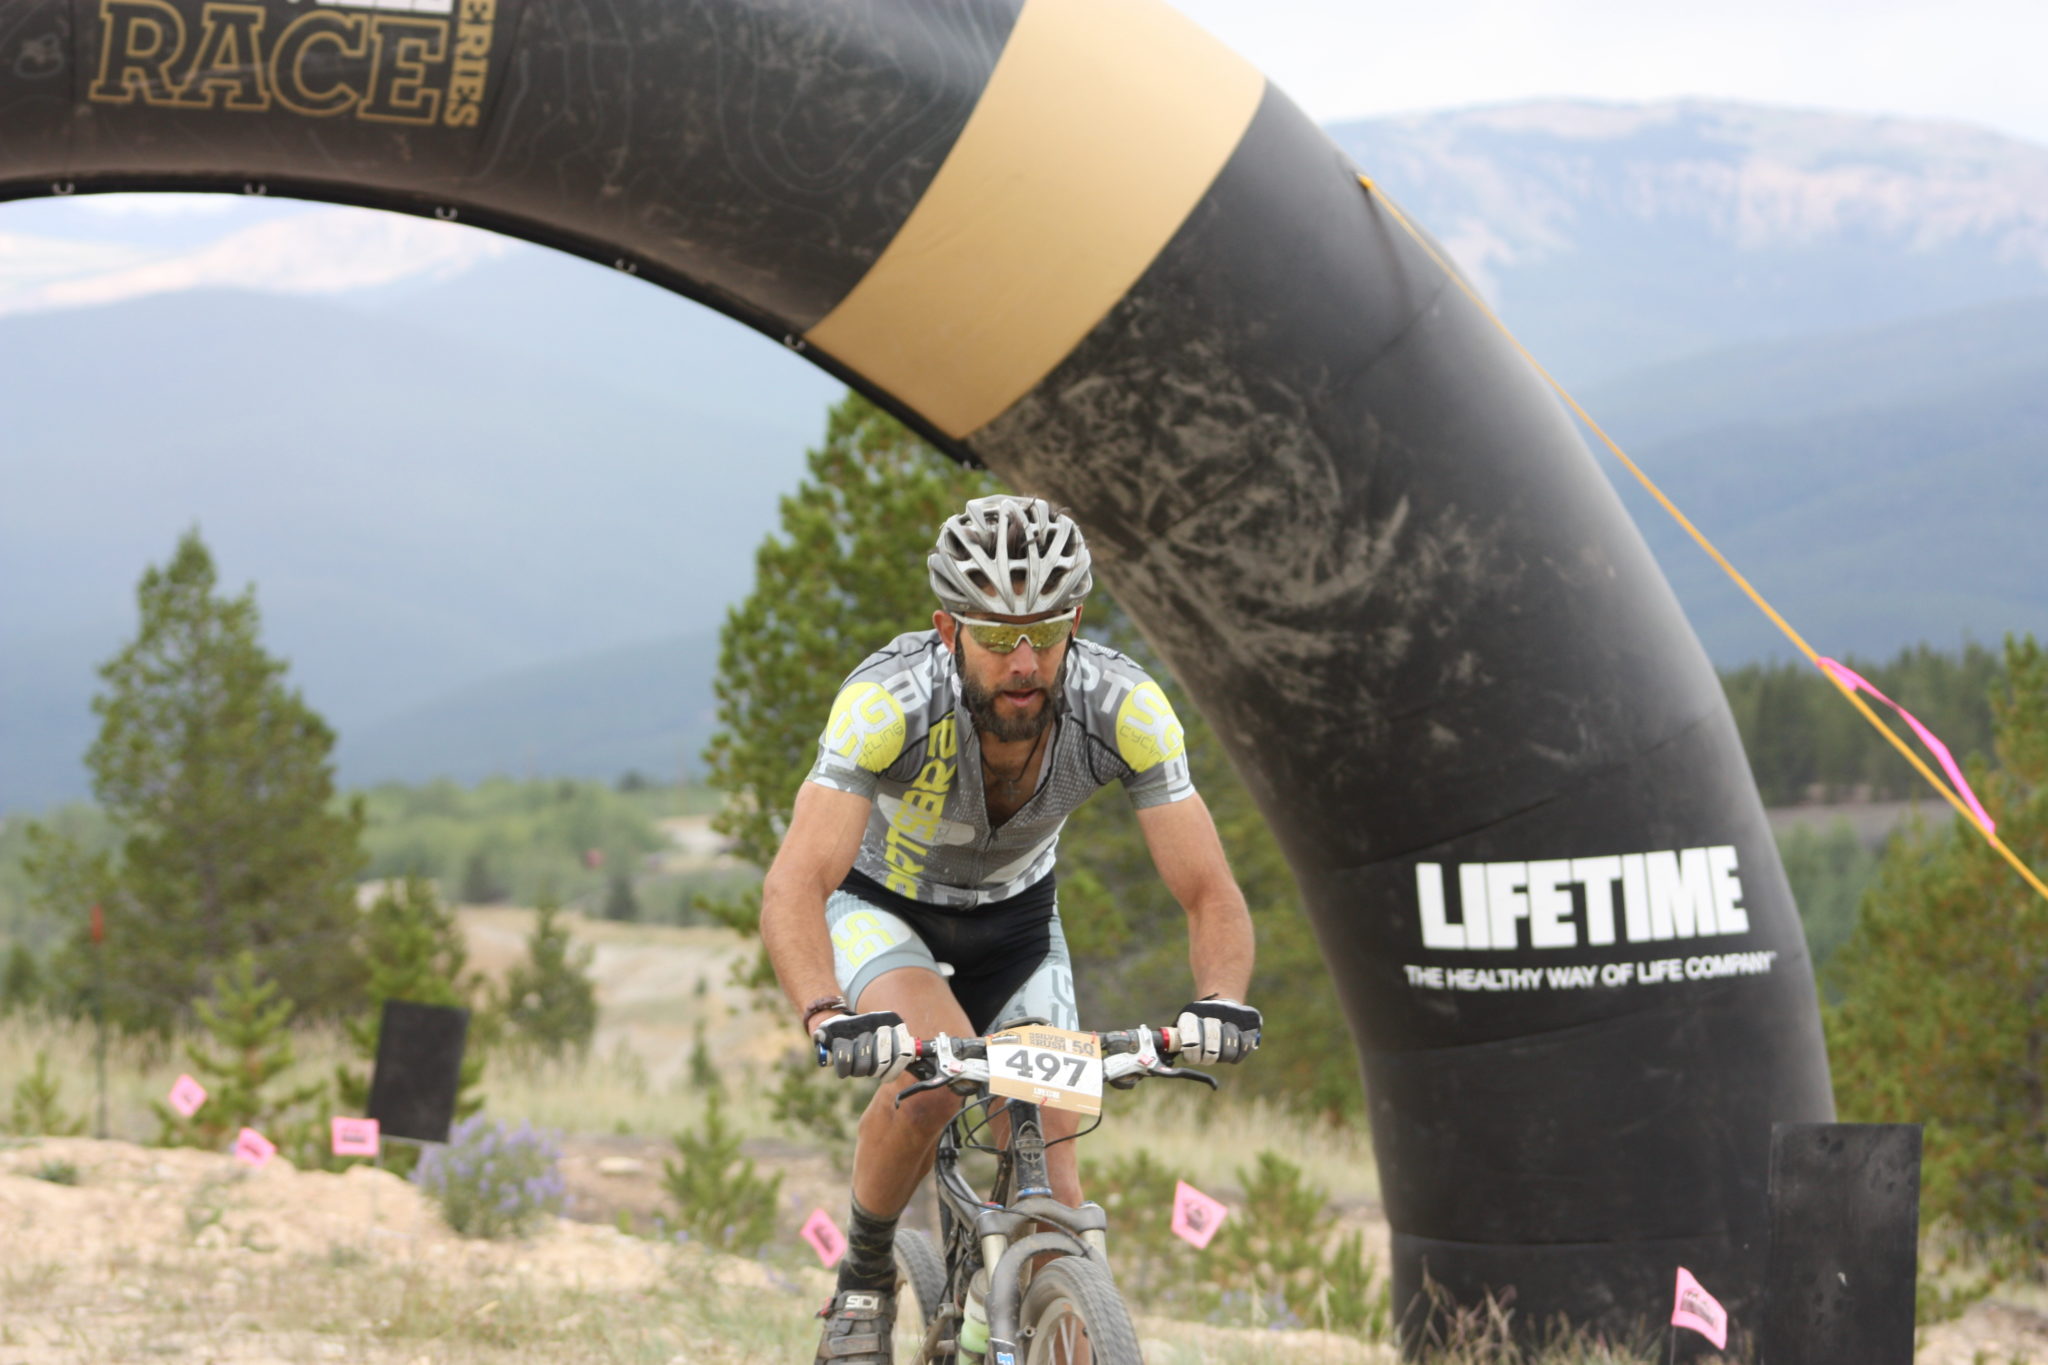 A white man riding a mountain bike passes through a finish line arch with tall hills and mountains in the unfocused background